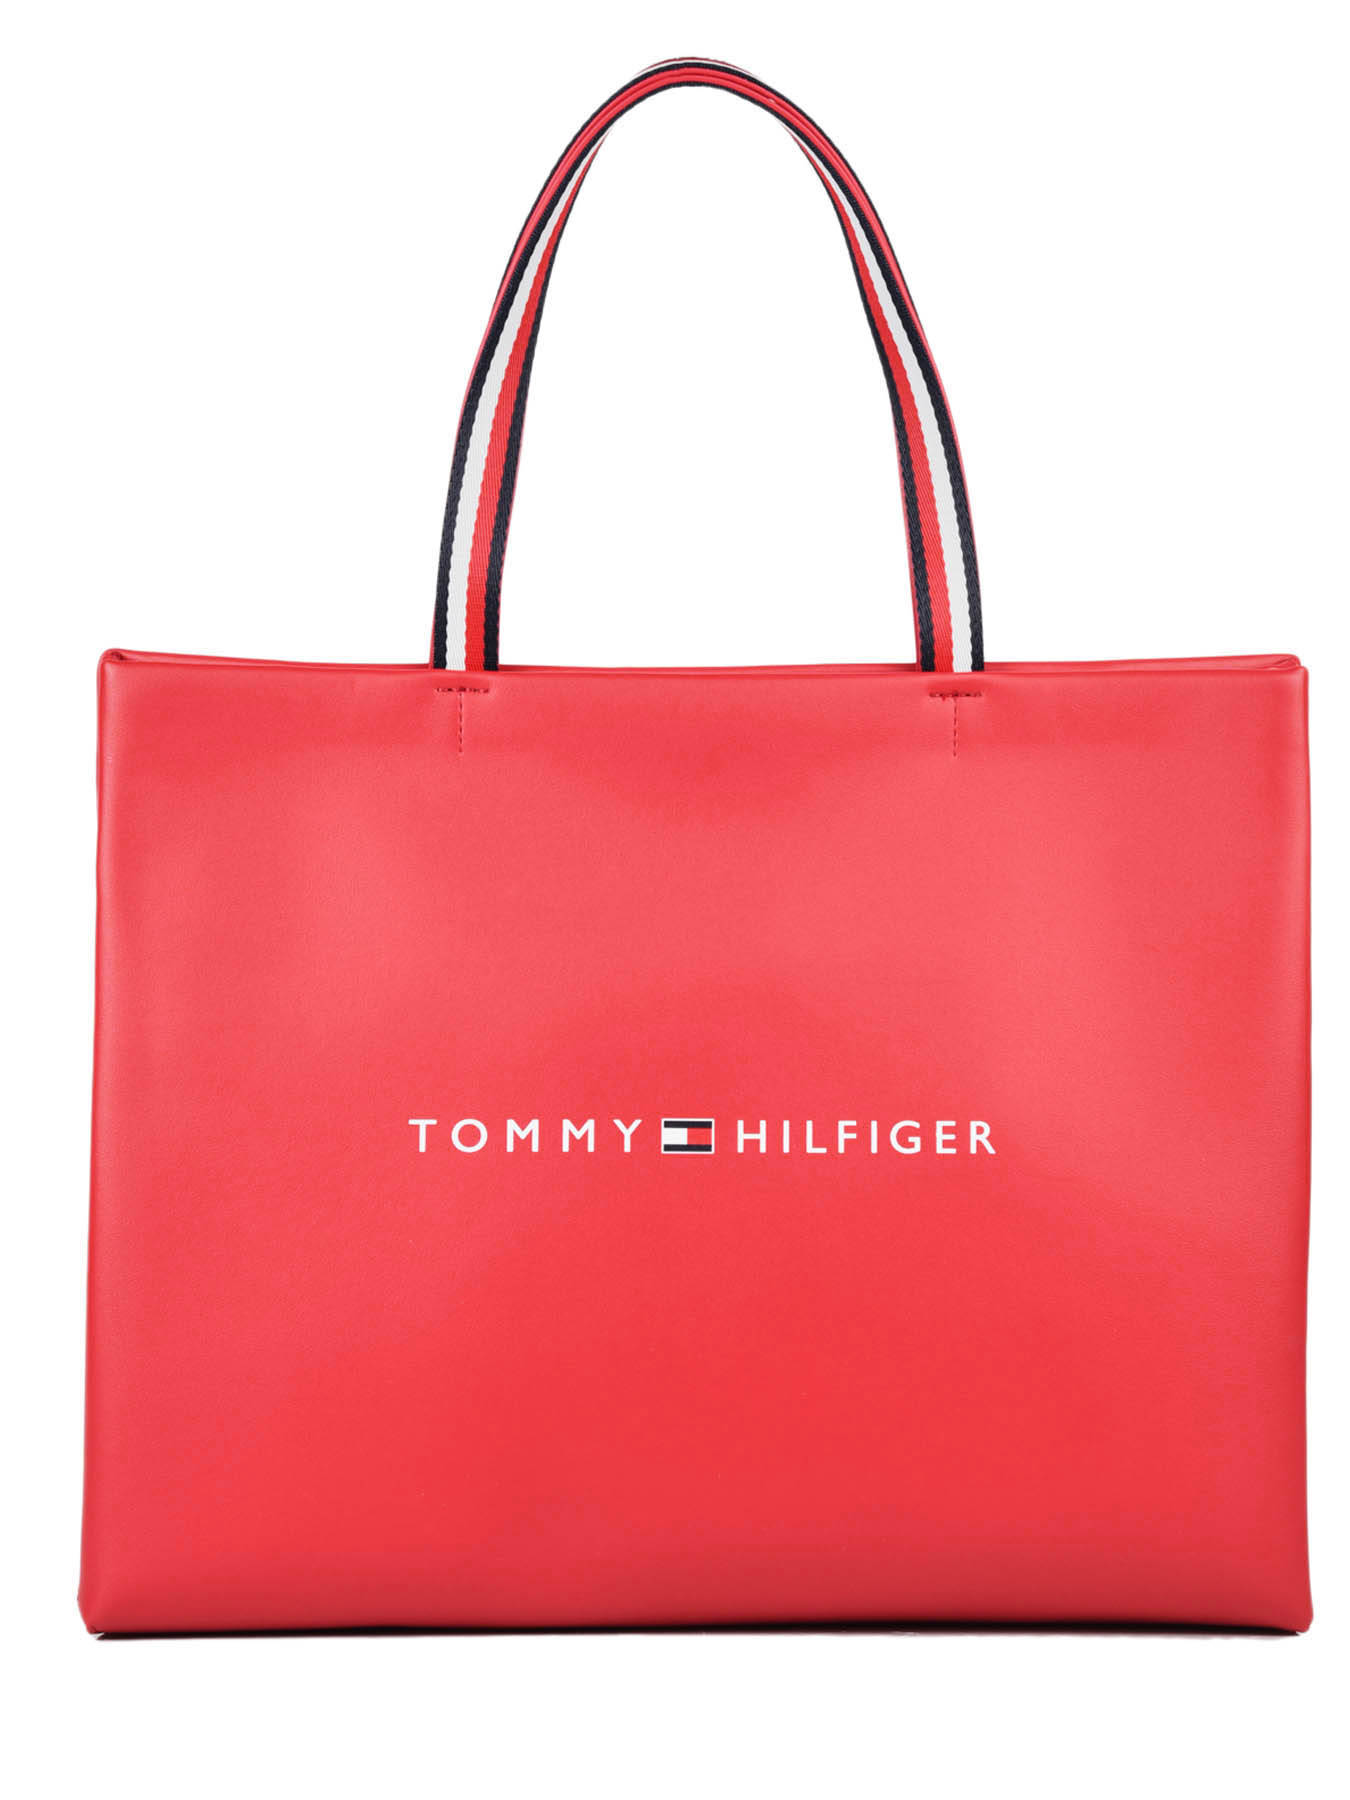 tommy hilfiger bags